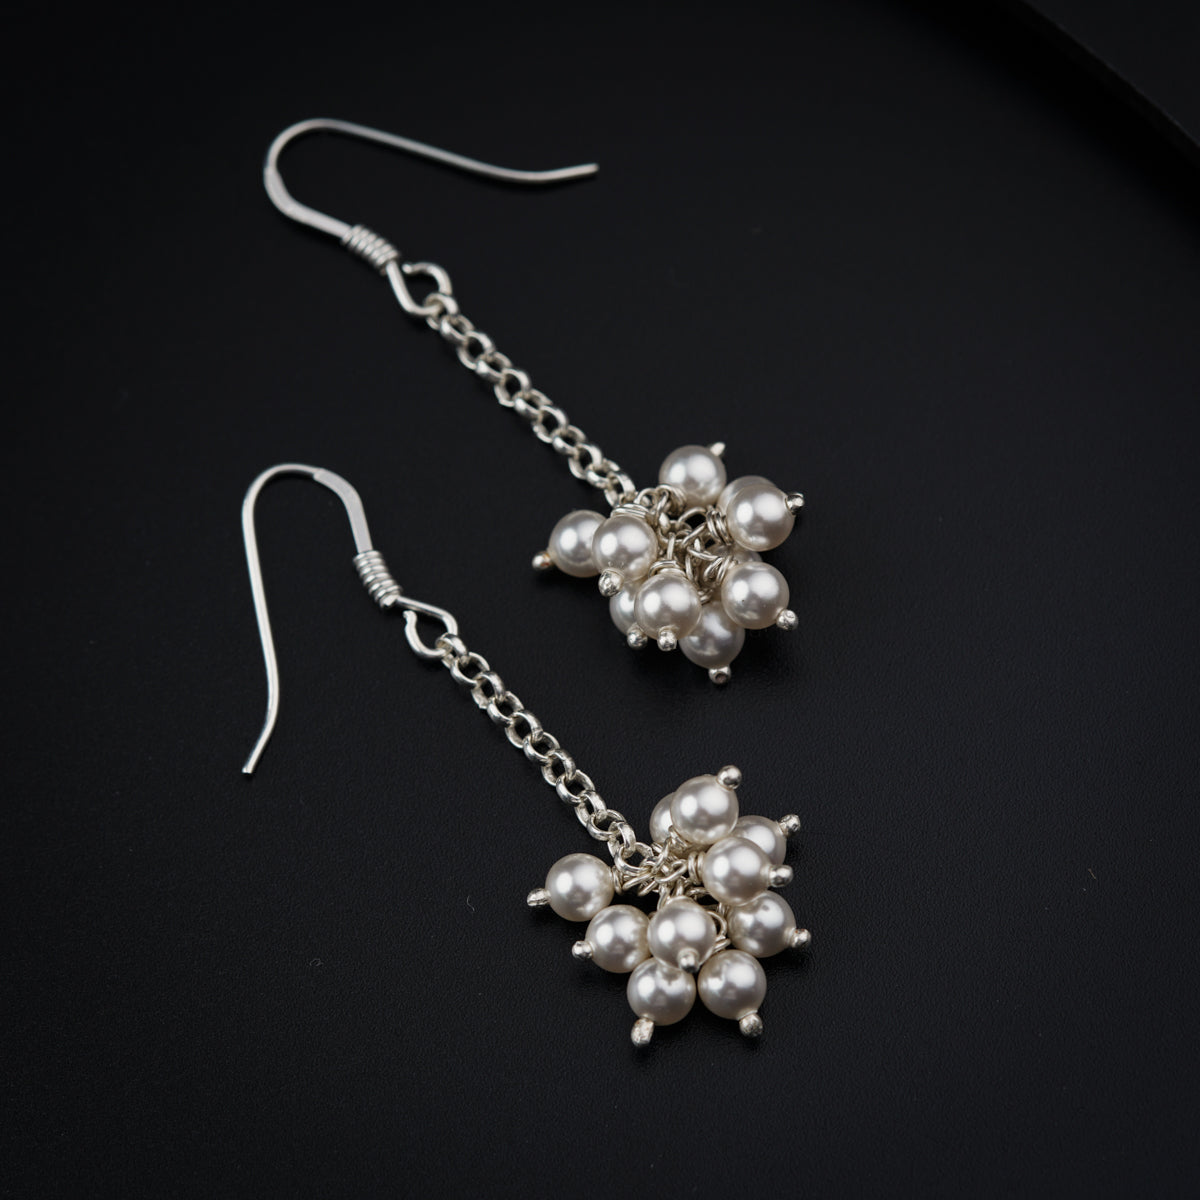 a pair of earrings with pearls hanging from them